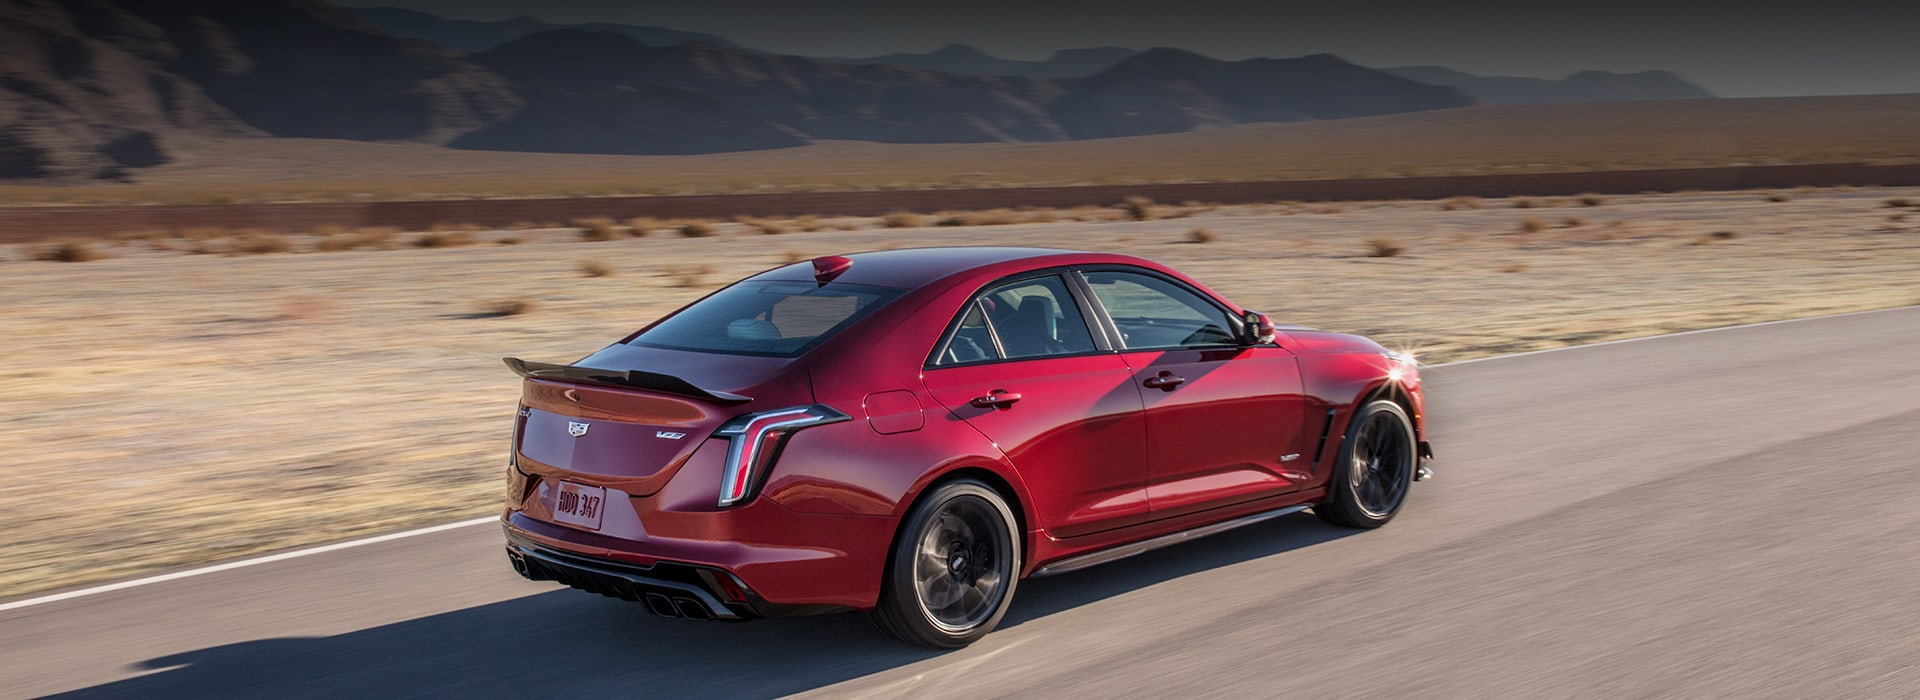 2022 Cadillac CT4 V Blackwing Reveal